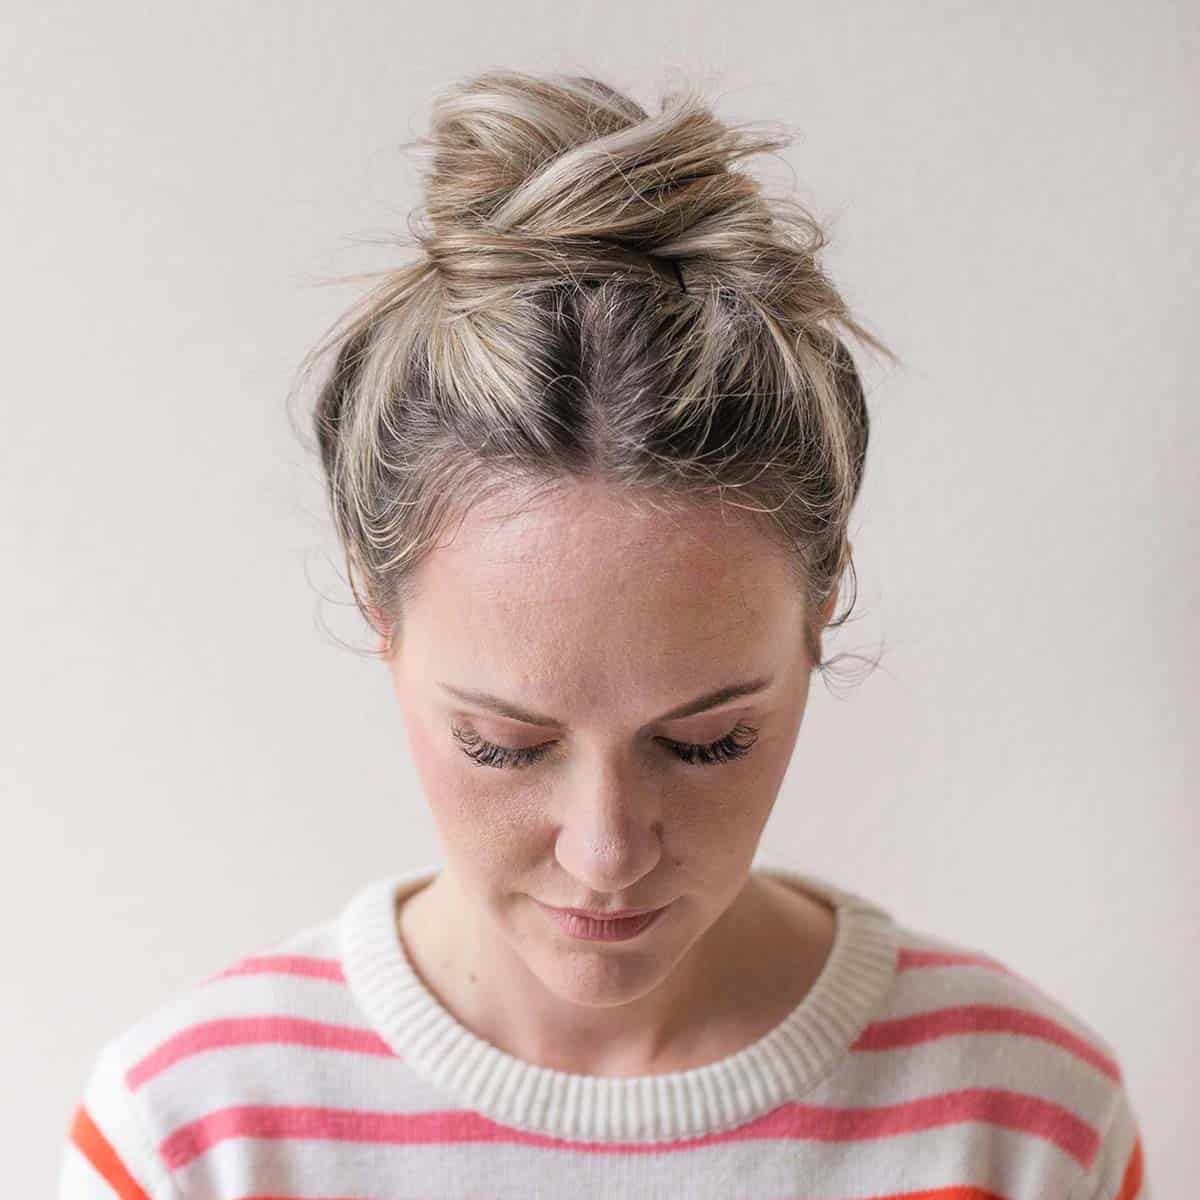 How to Style a Top Knot